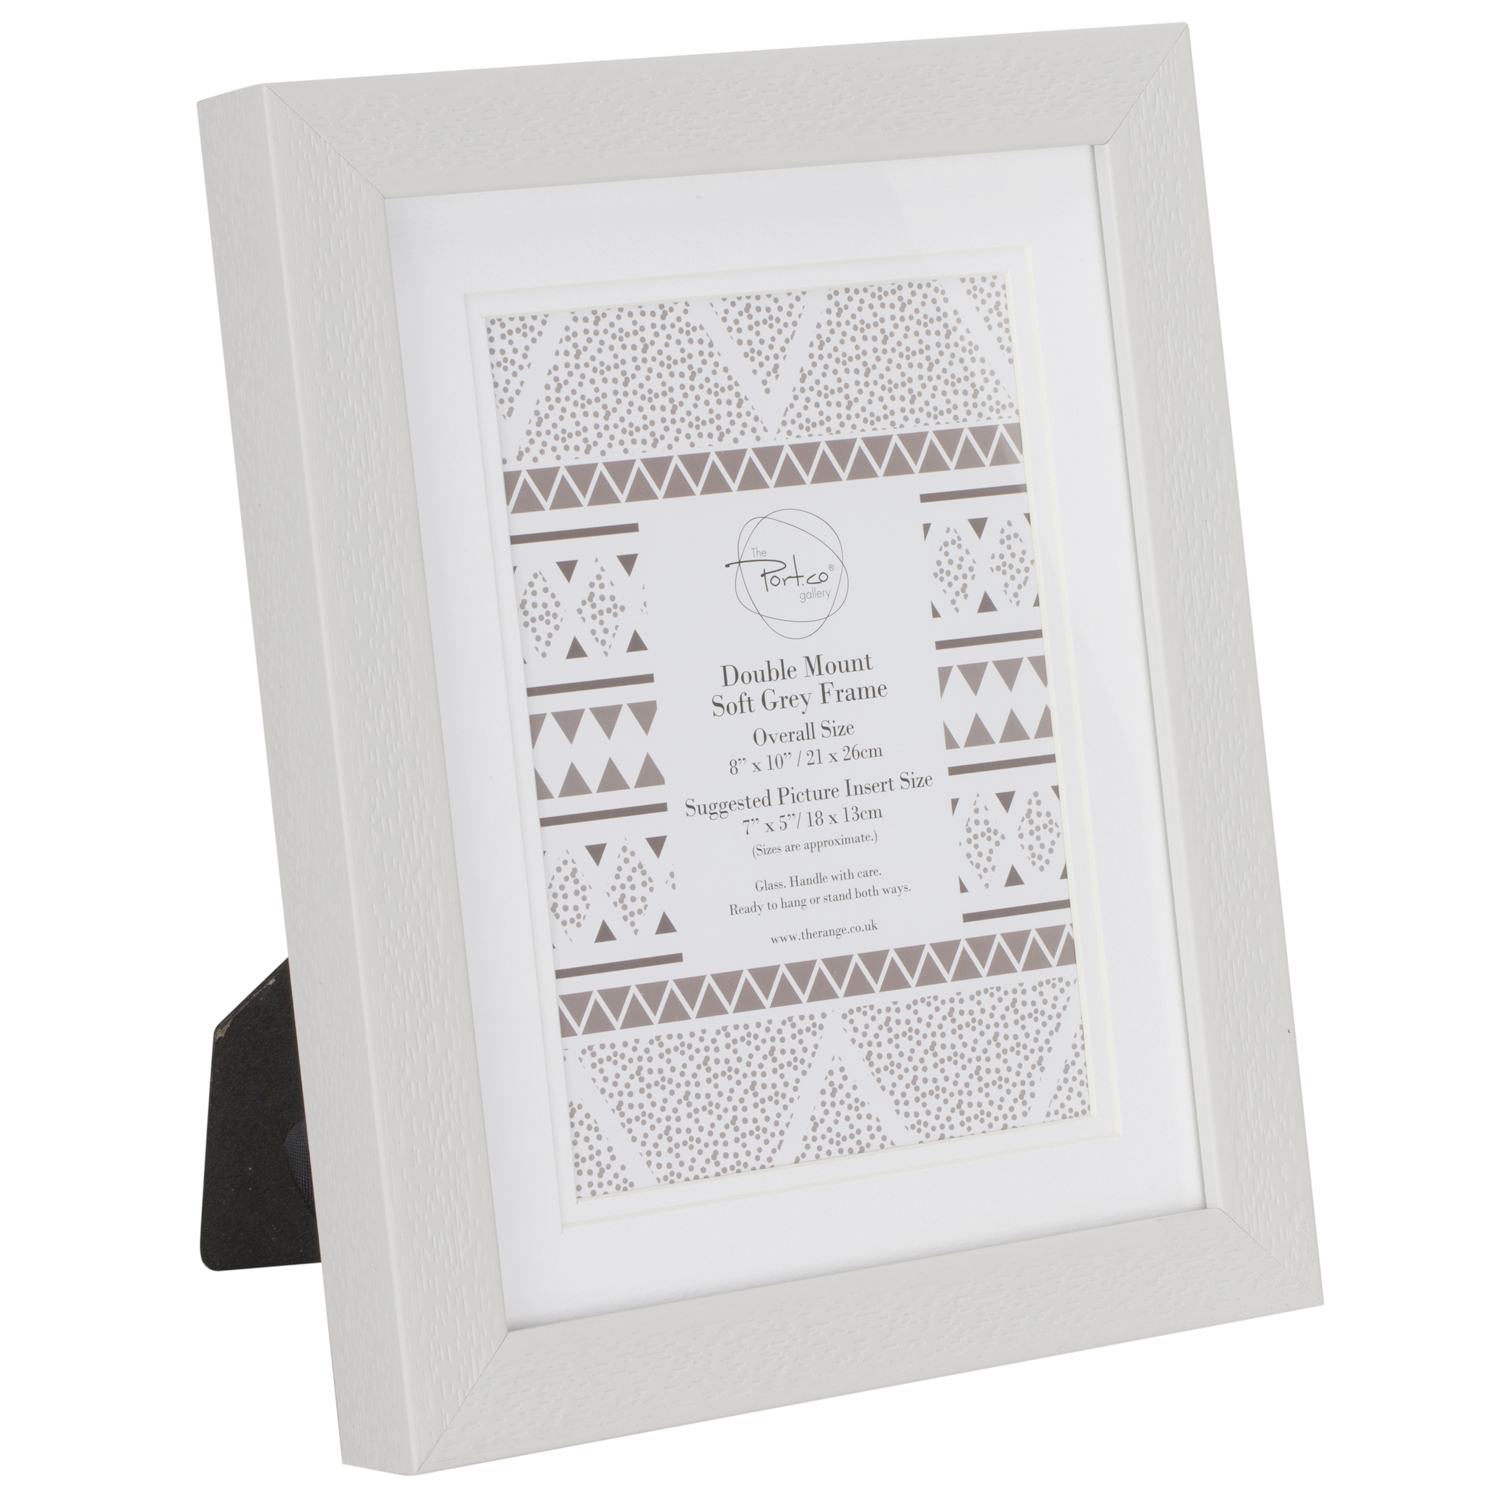 The Port. Co Gallery Soft Grey Double Mount Photo Frame 7 x 5 inch Image 2